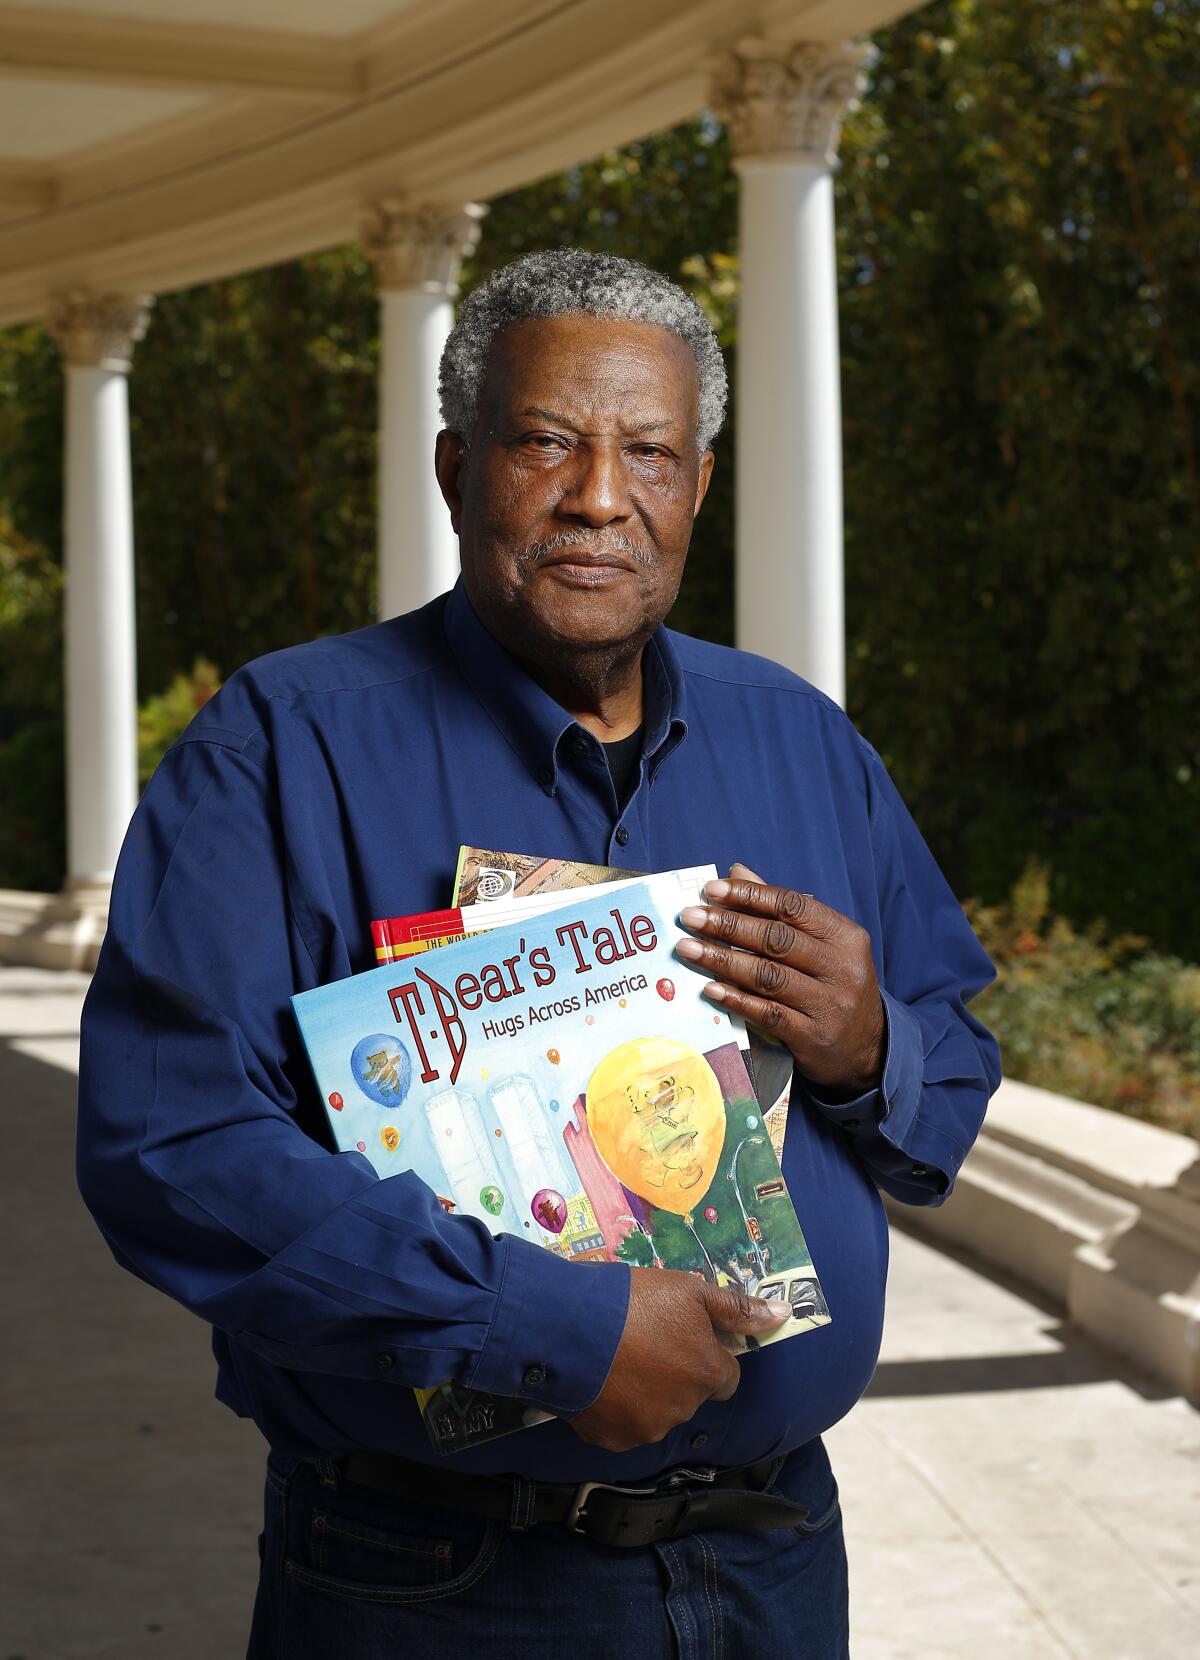 Roosevelt Brown is the creator and organizer of San Diego's Annual Children's Book Party in Balboa Park